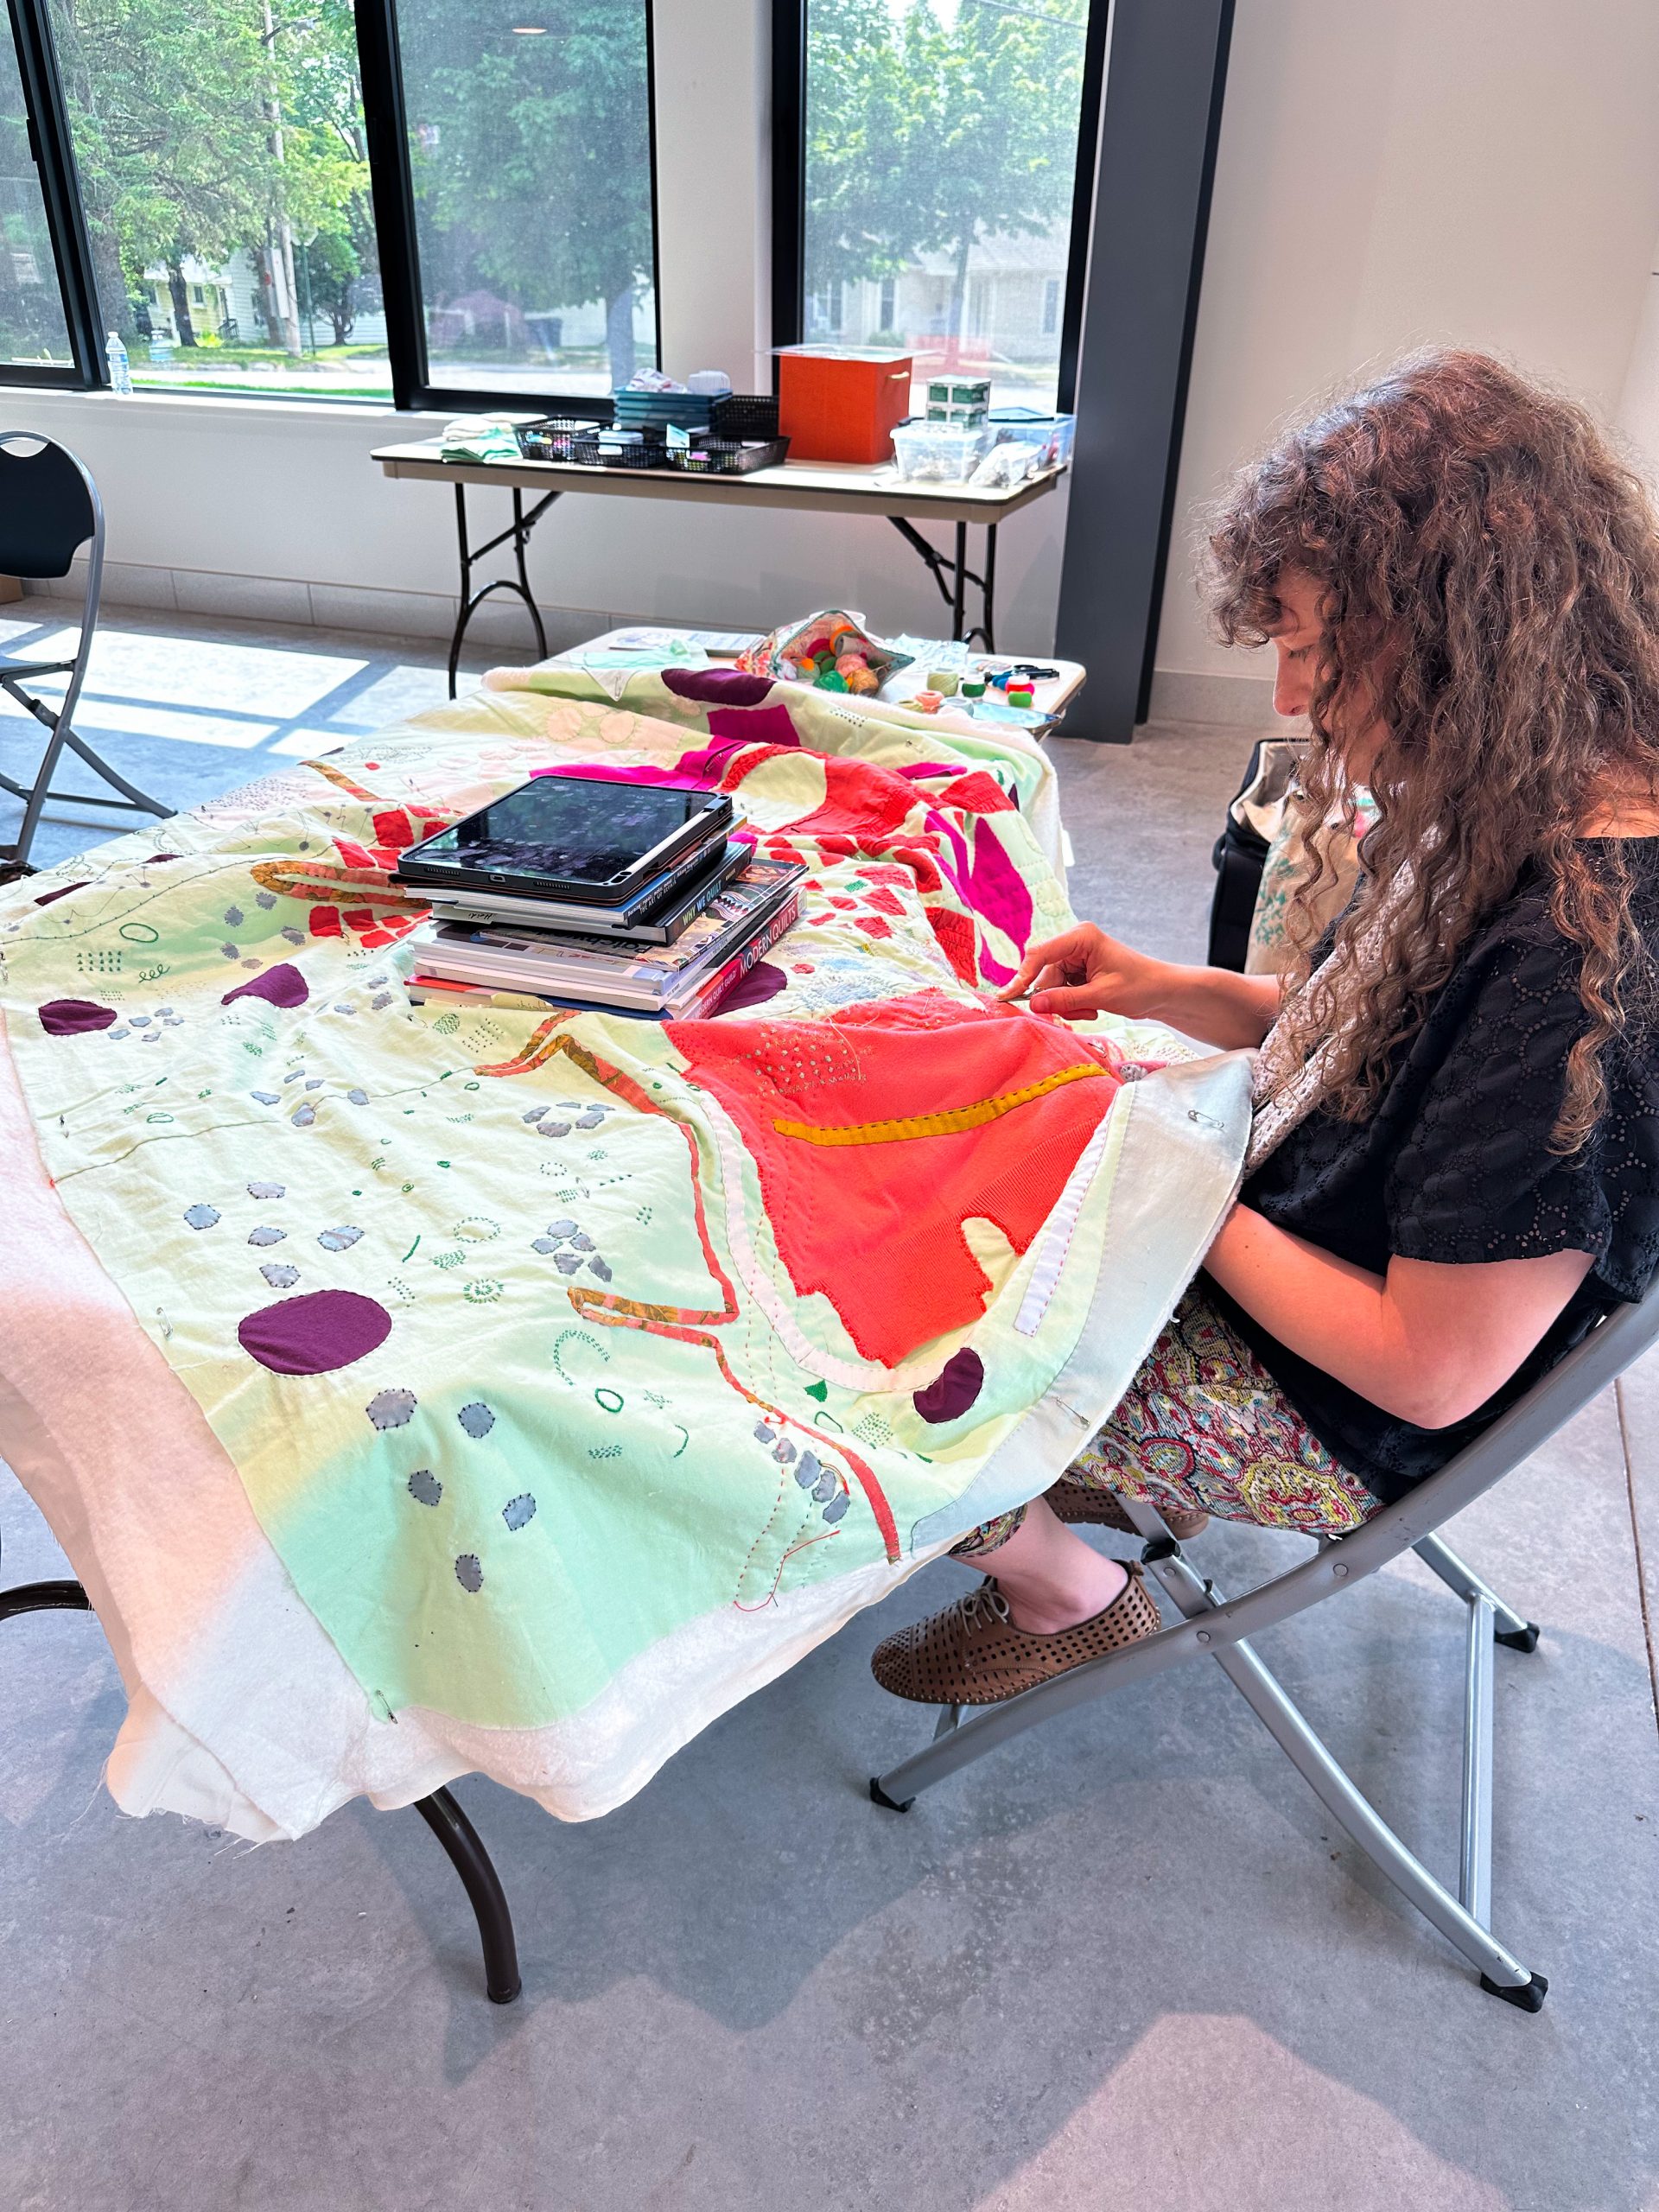 Heidi Parkes sits at a table working on her large, colorful quilt made from green and red-orange fabric.